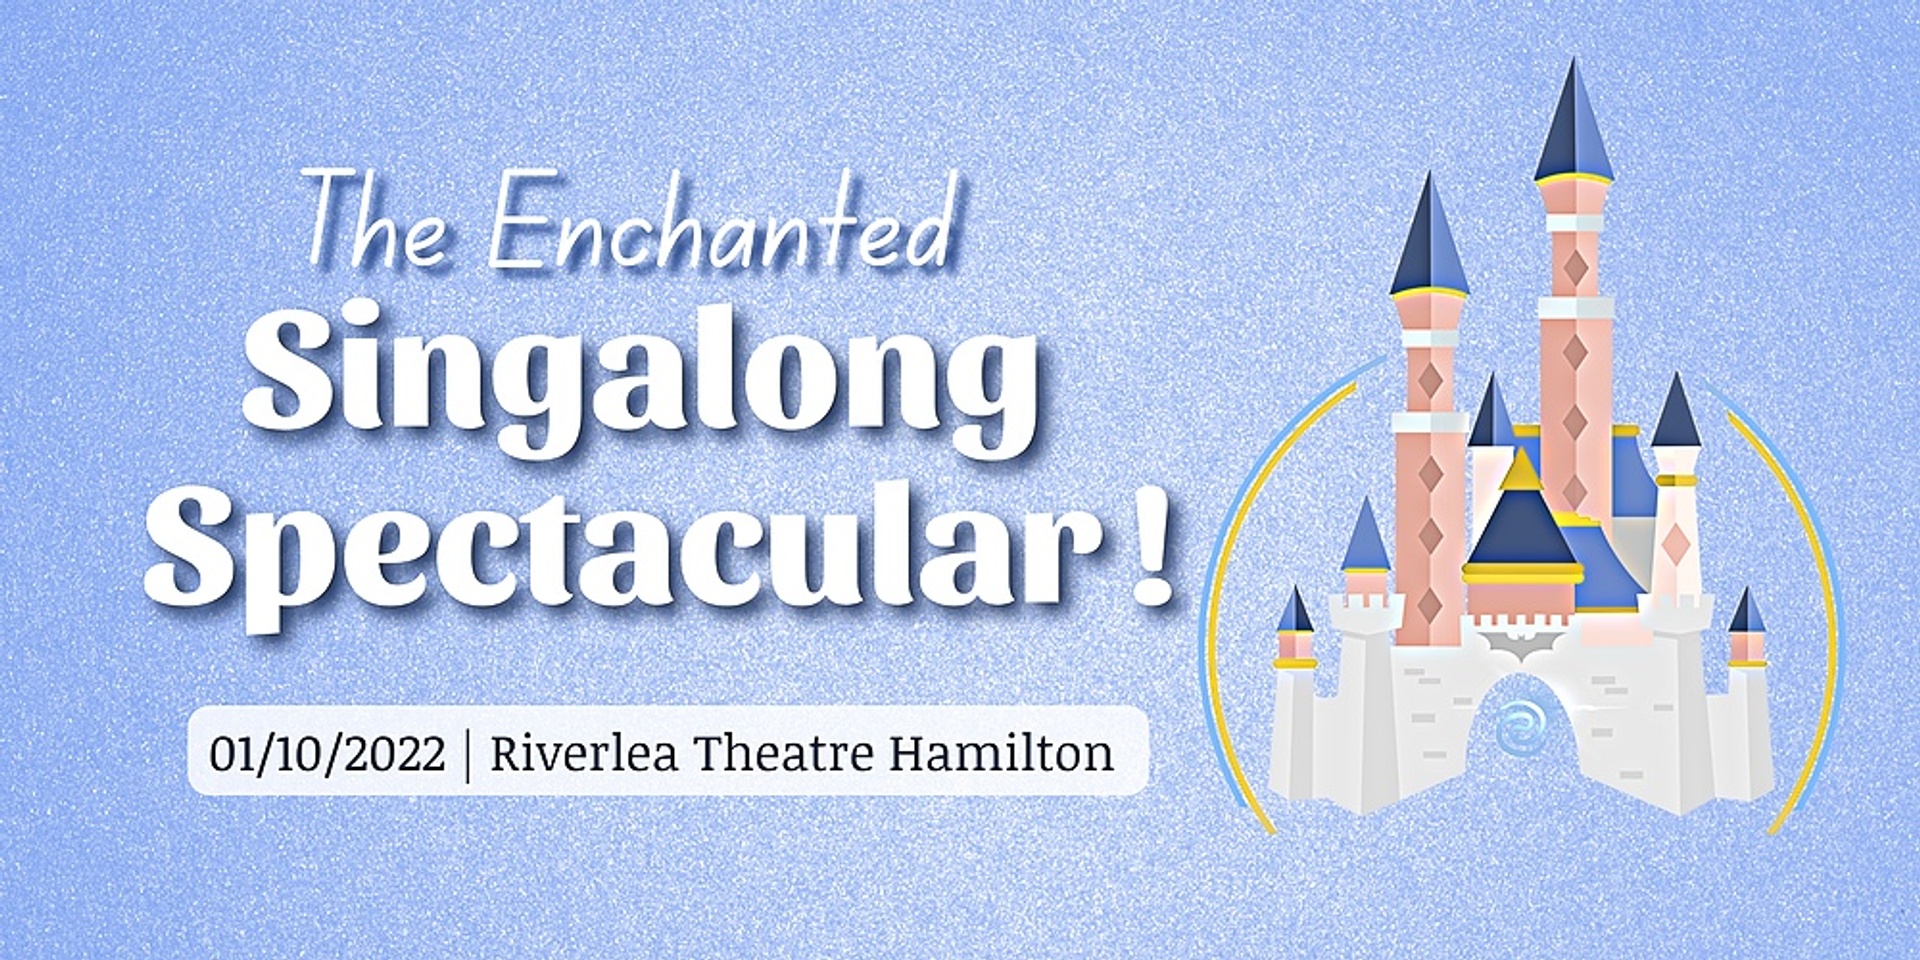 The Enchanted Singalong Spectacular